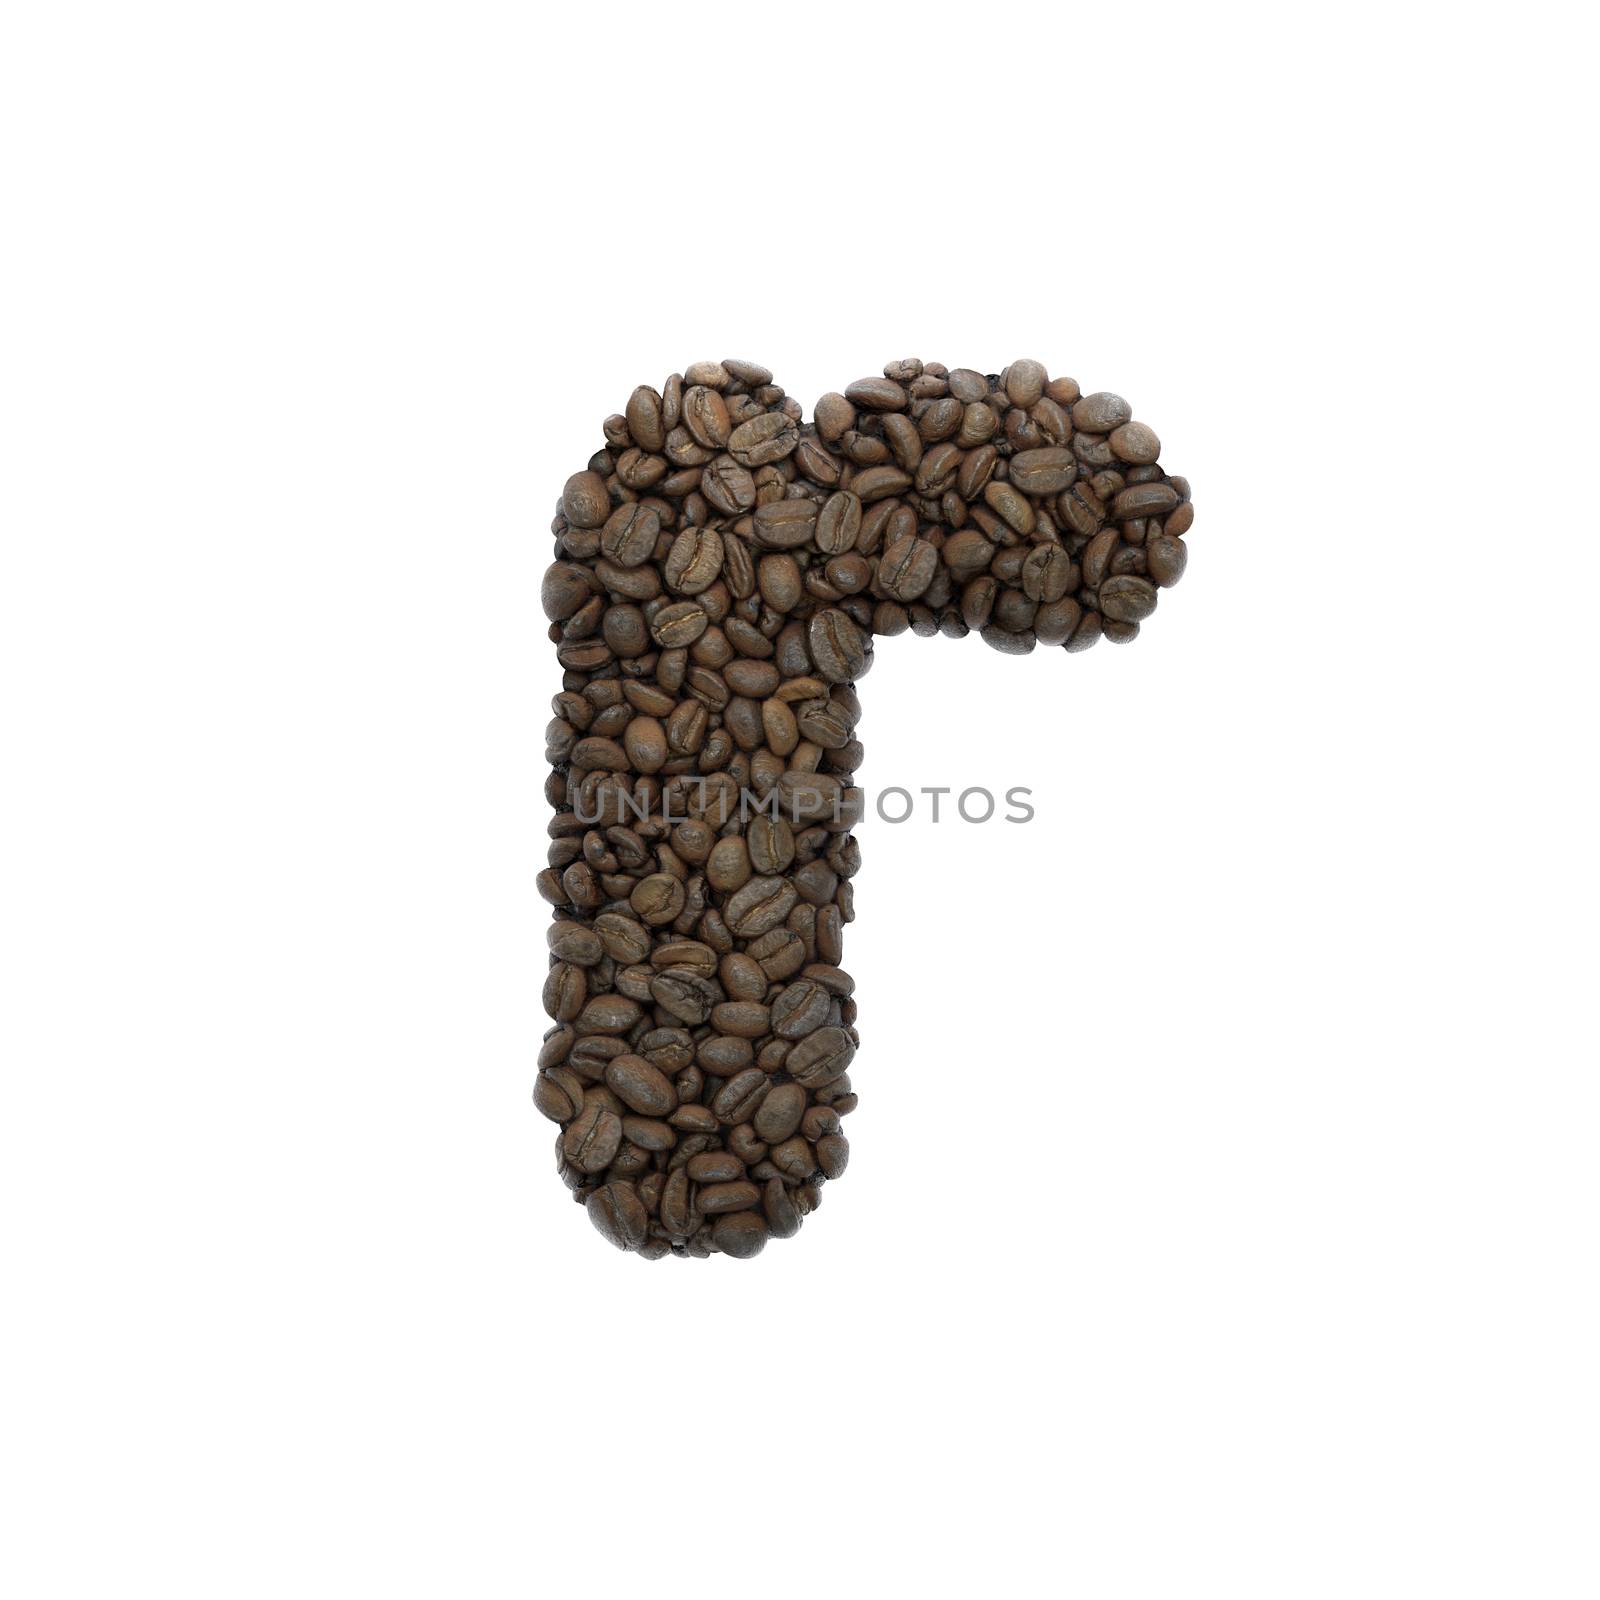 Coffee letter R - Small 3d roasted beans font isolated on white background. This alphabet is perfect for creative illustrations related but not limited to Coffee, energy, insomnia...